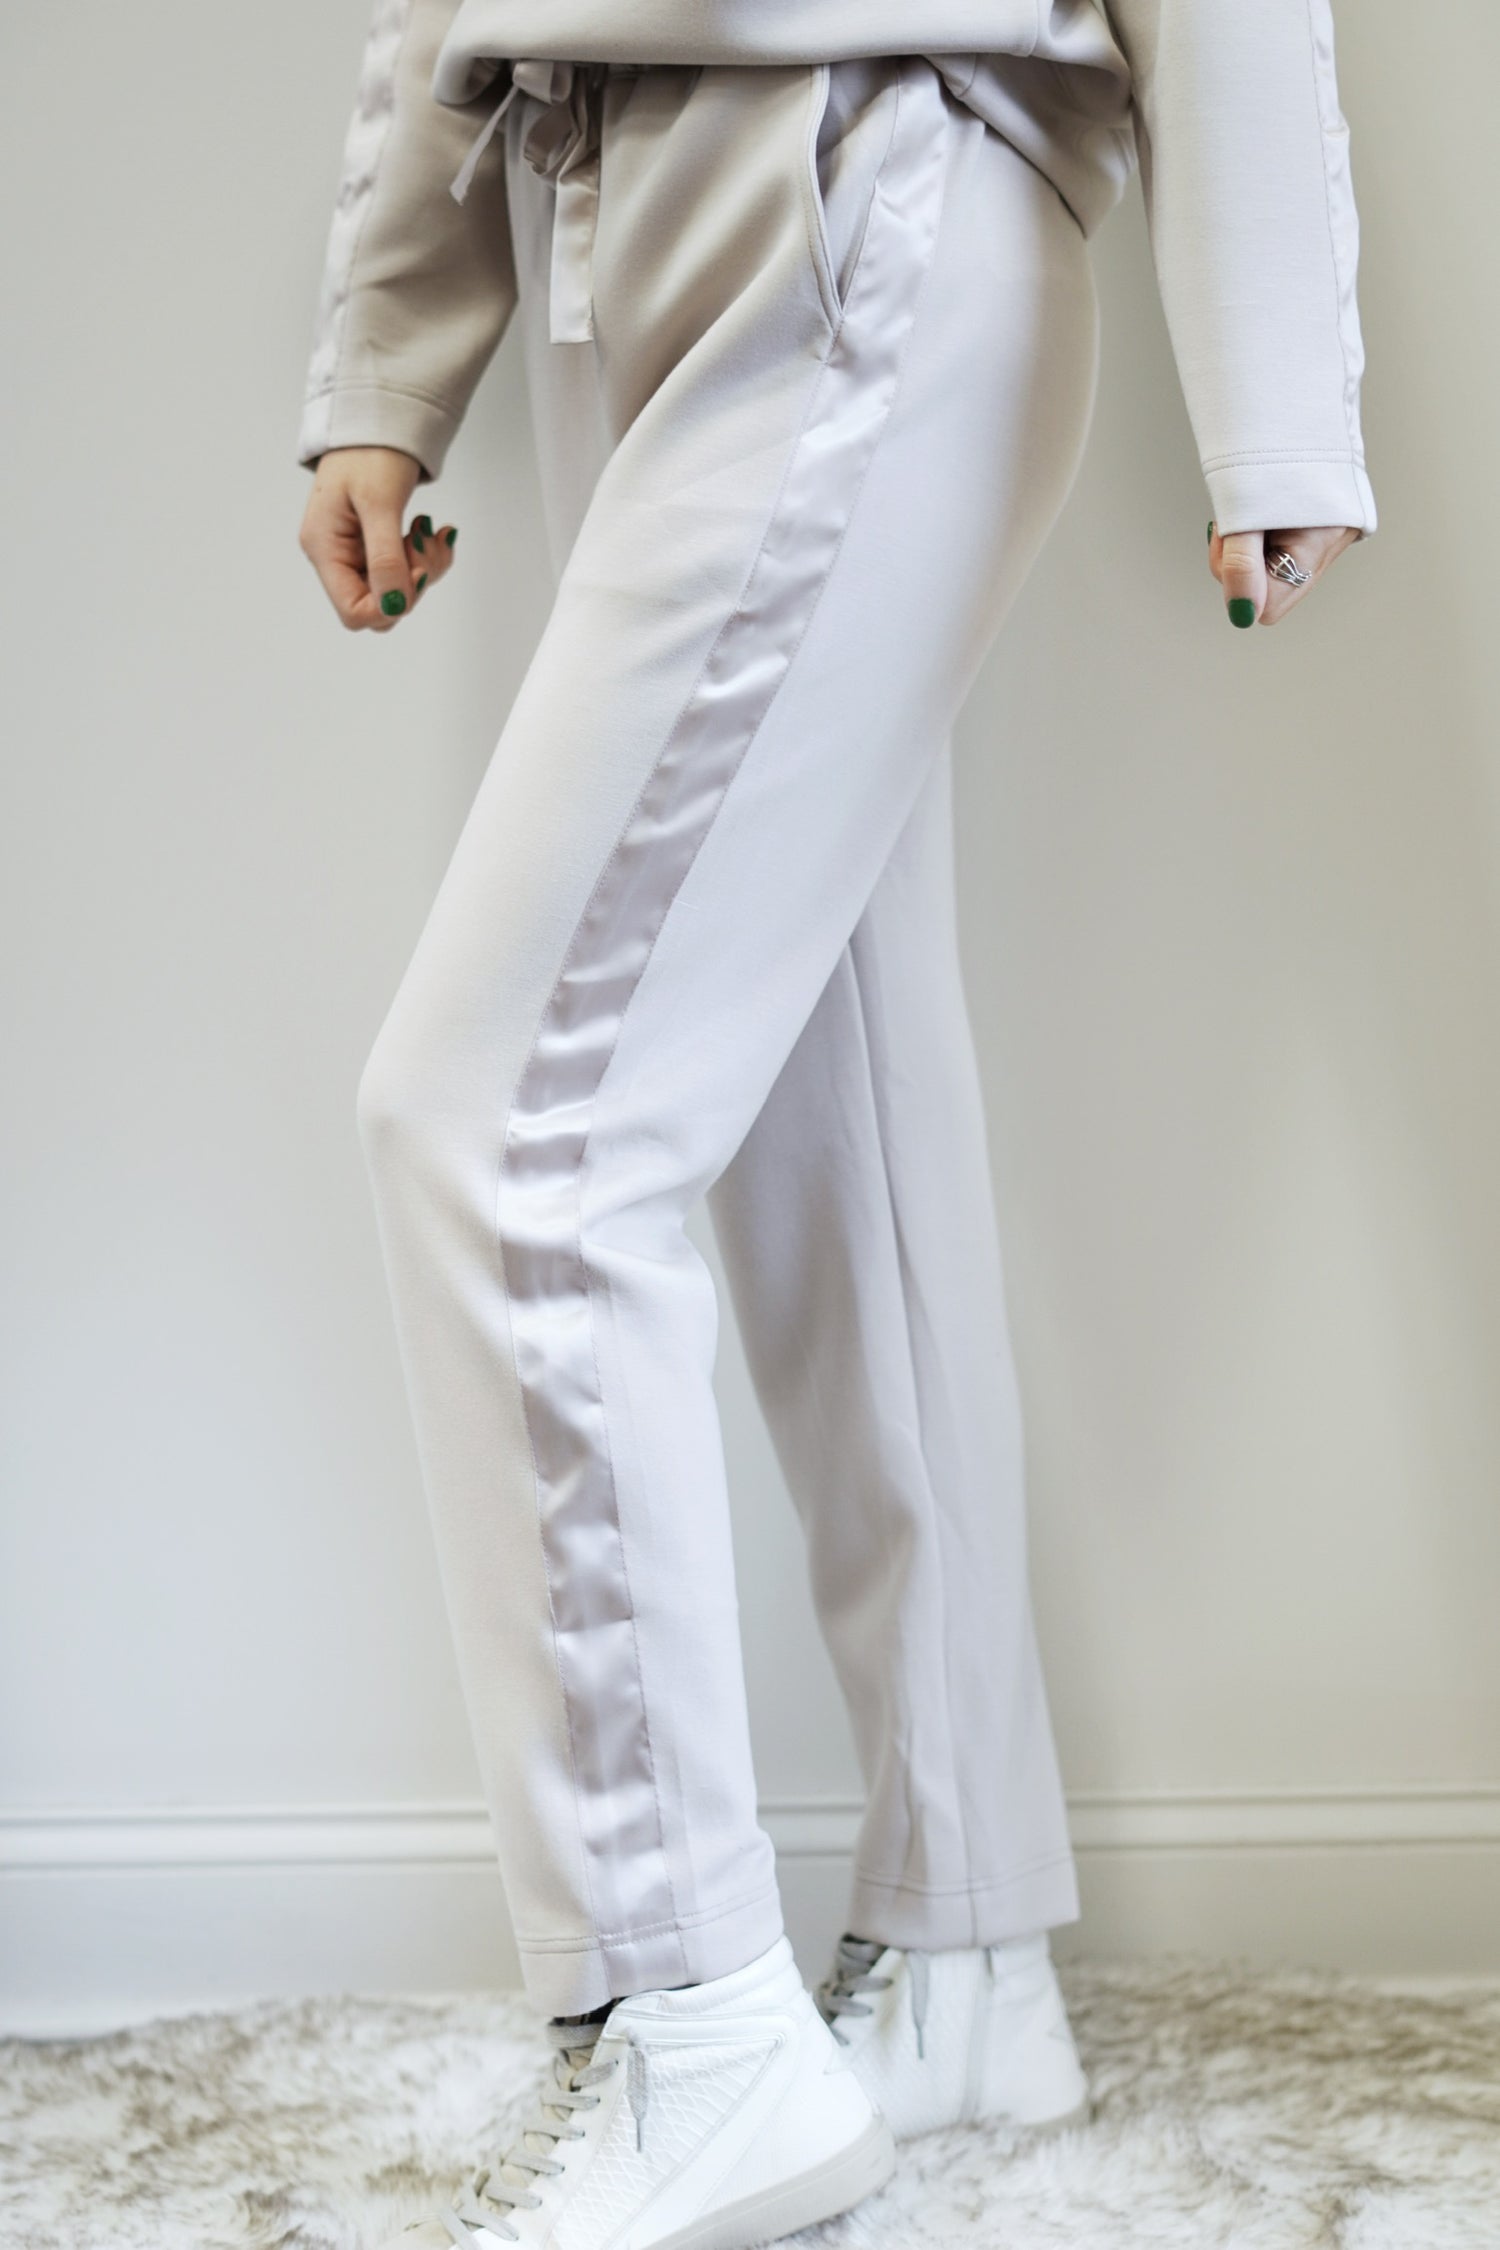 So Sleek Satin Trim Athletic Pant Mid Waisted Elastic Waistband with Tie Satin Trim Detail on Side of Legs Colors:  Cream, Tapered Pant  Ankle Length Relaxed Fit 48% Modal, 46% Polyester, 6% Spandex